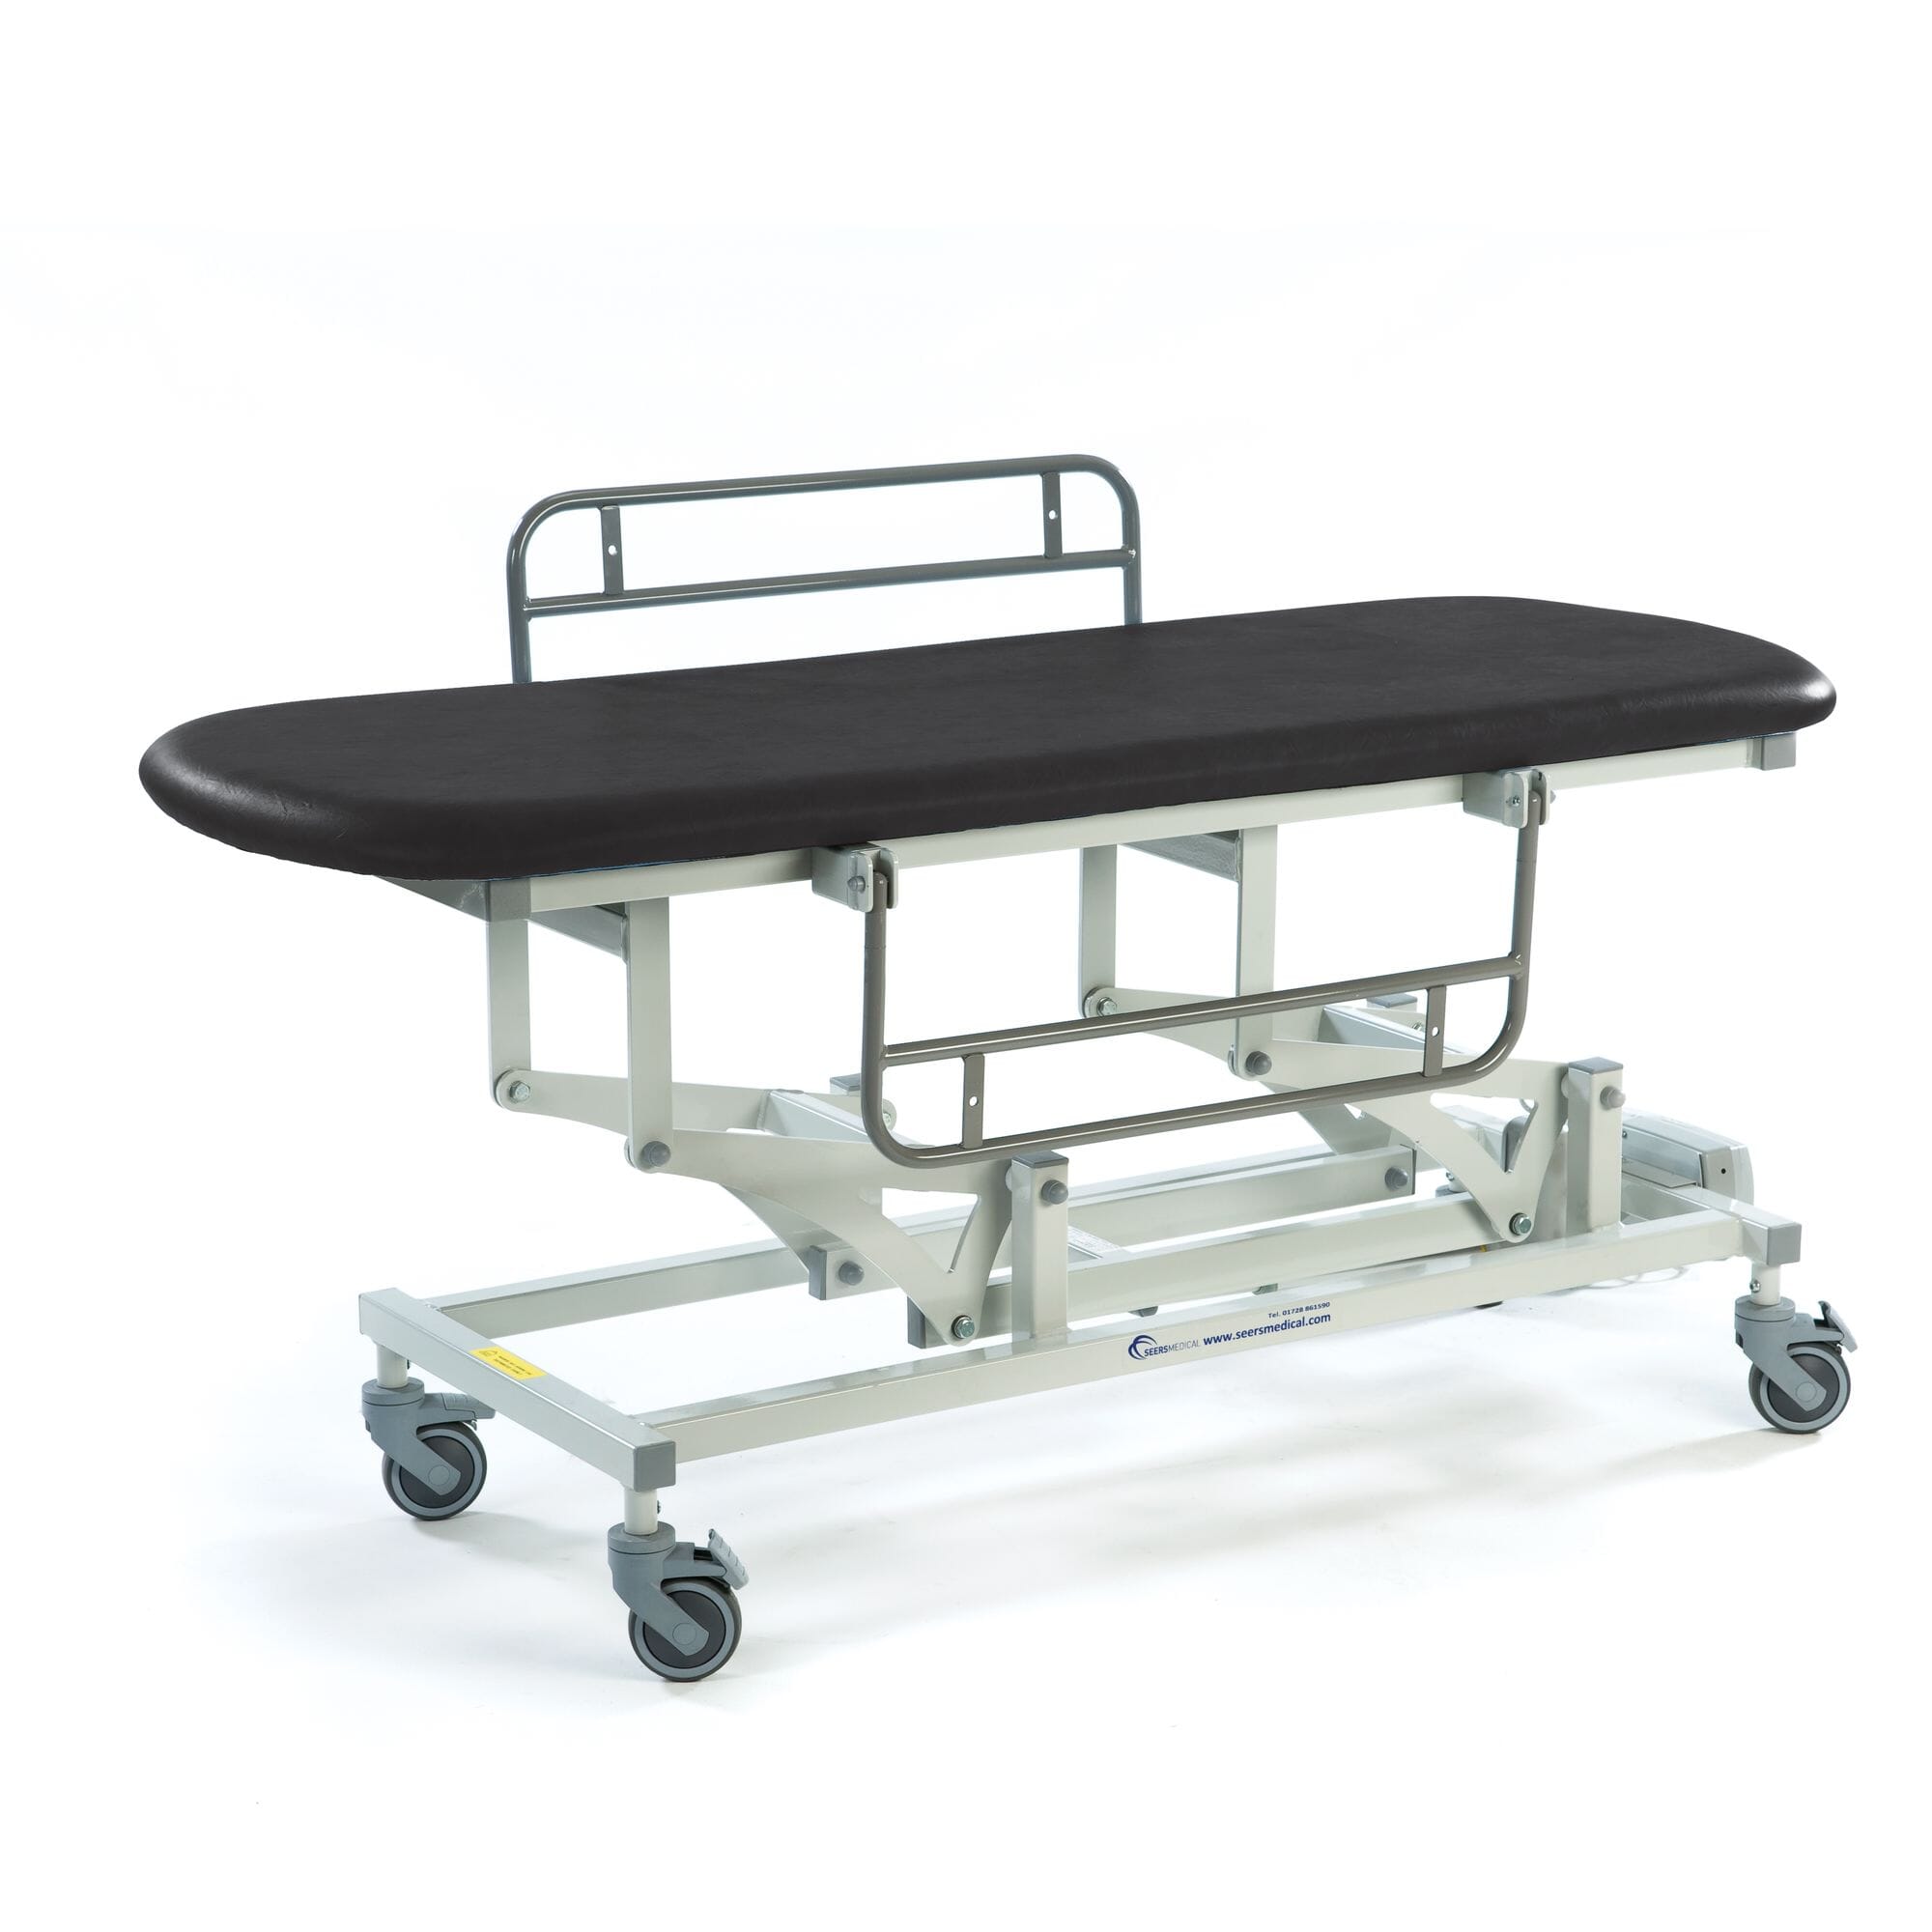 View Electric Sterling Changing Table Black 1520mm information